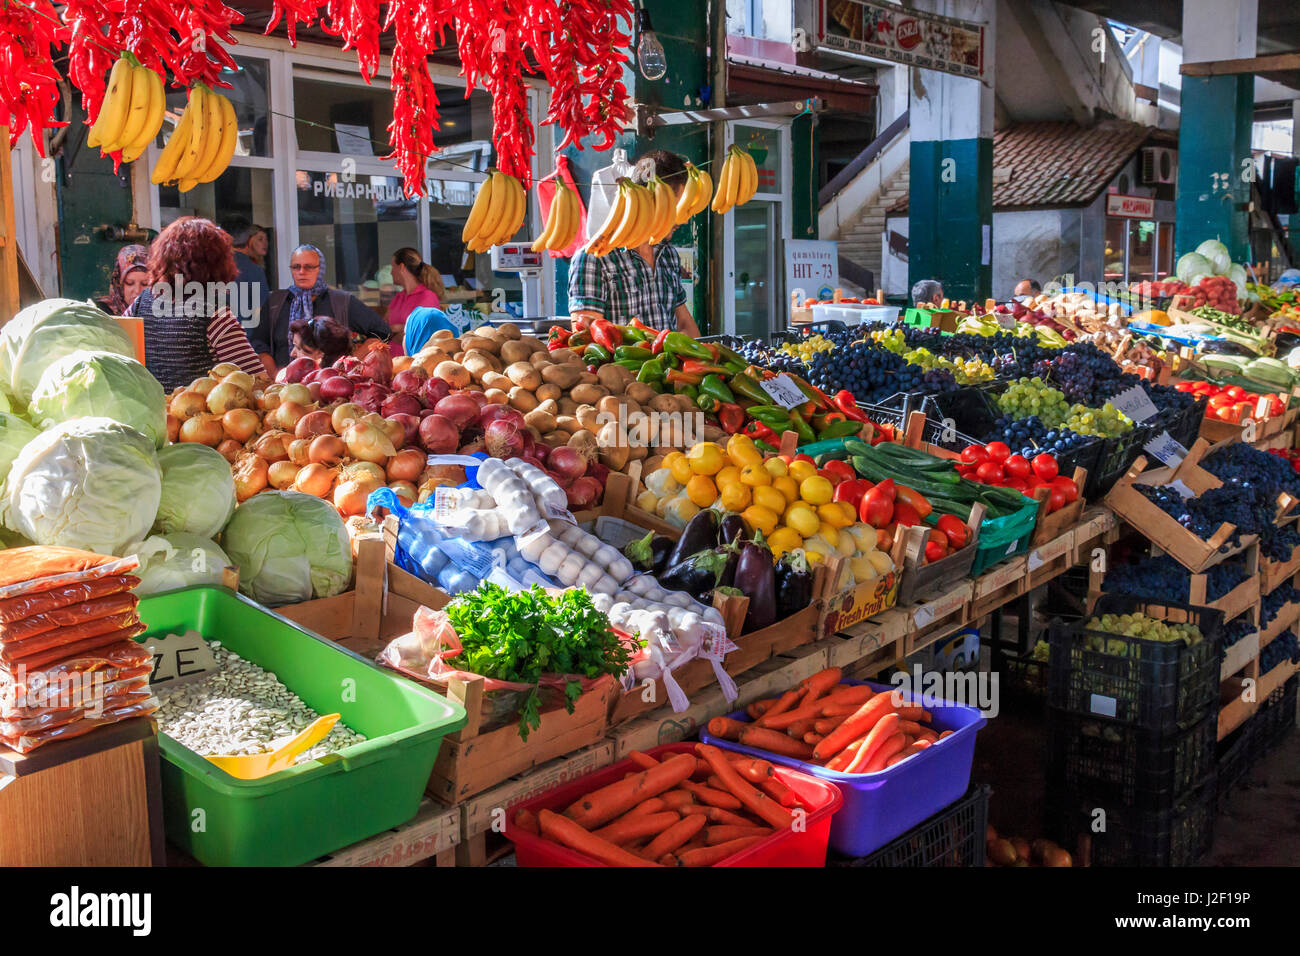 Macedonia, Lake Ohrid, Struga situated in the Southwest region. The town of Struga is the seat of Struga Municipality. Fruit, vegetable markets, shops, shoppers, cafes. (Editorial Use Only) Stock Photo